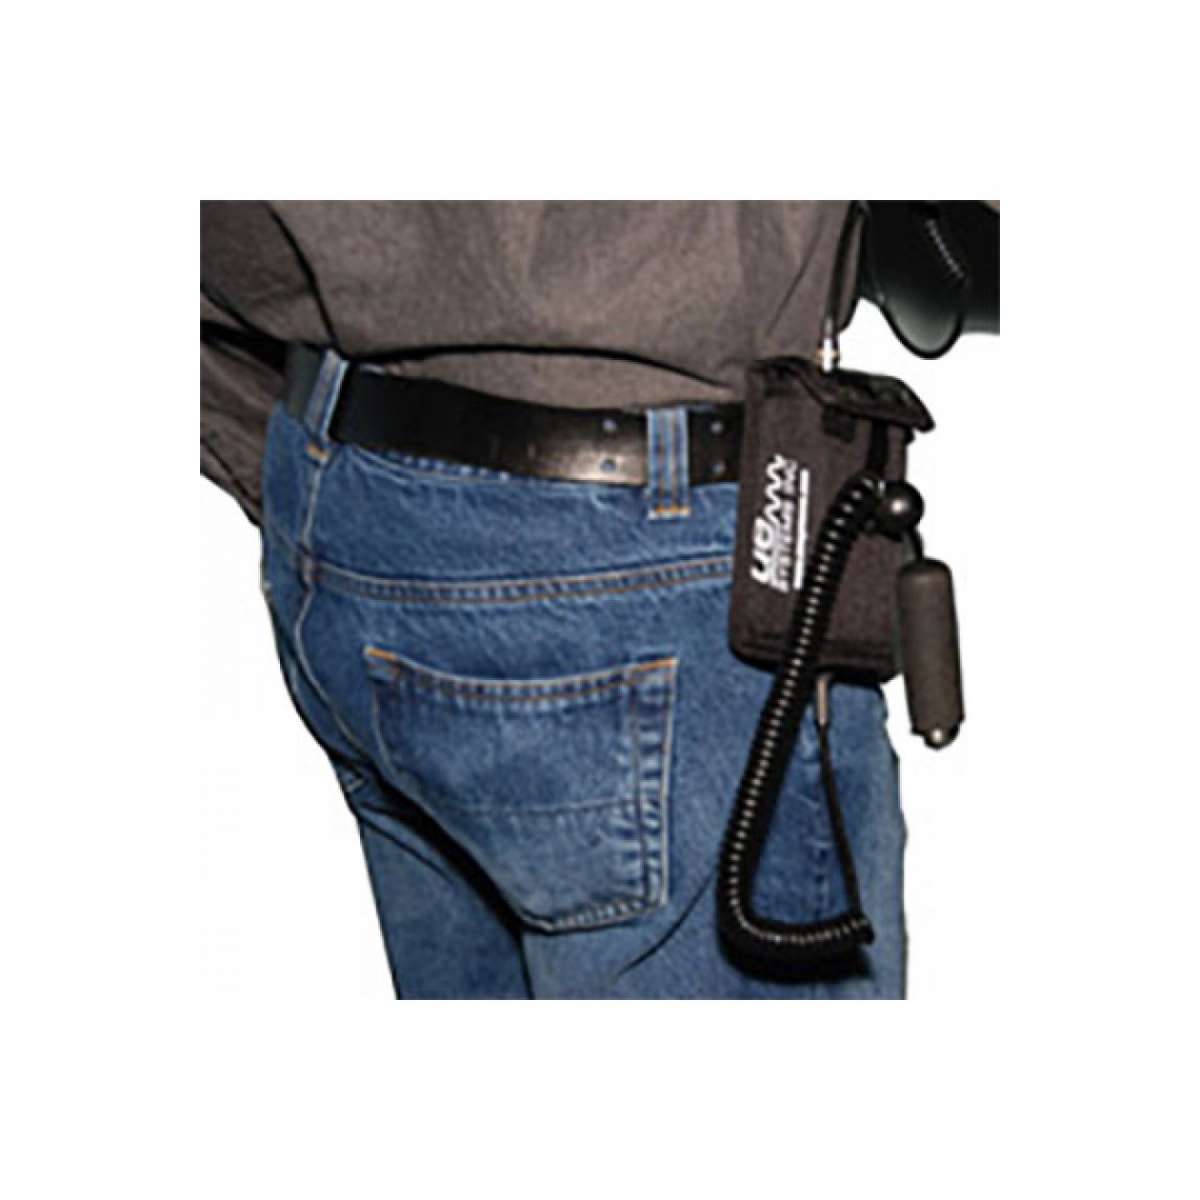 ue systems Holster / Belt Clip for UP-201